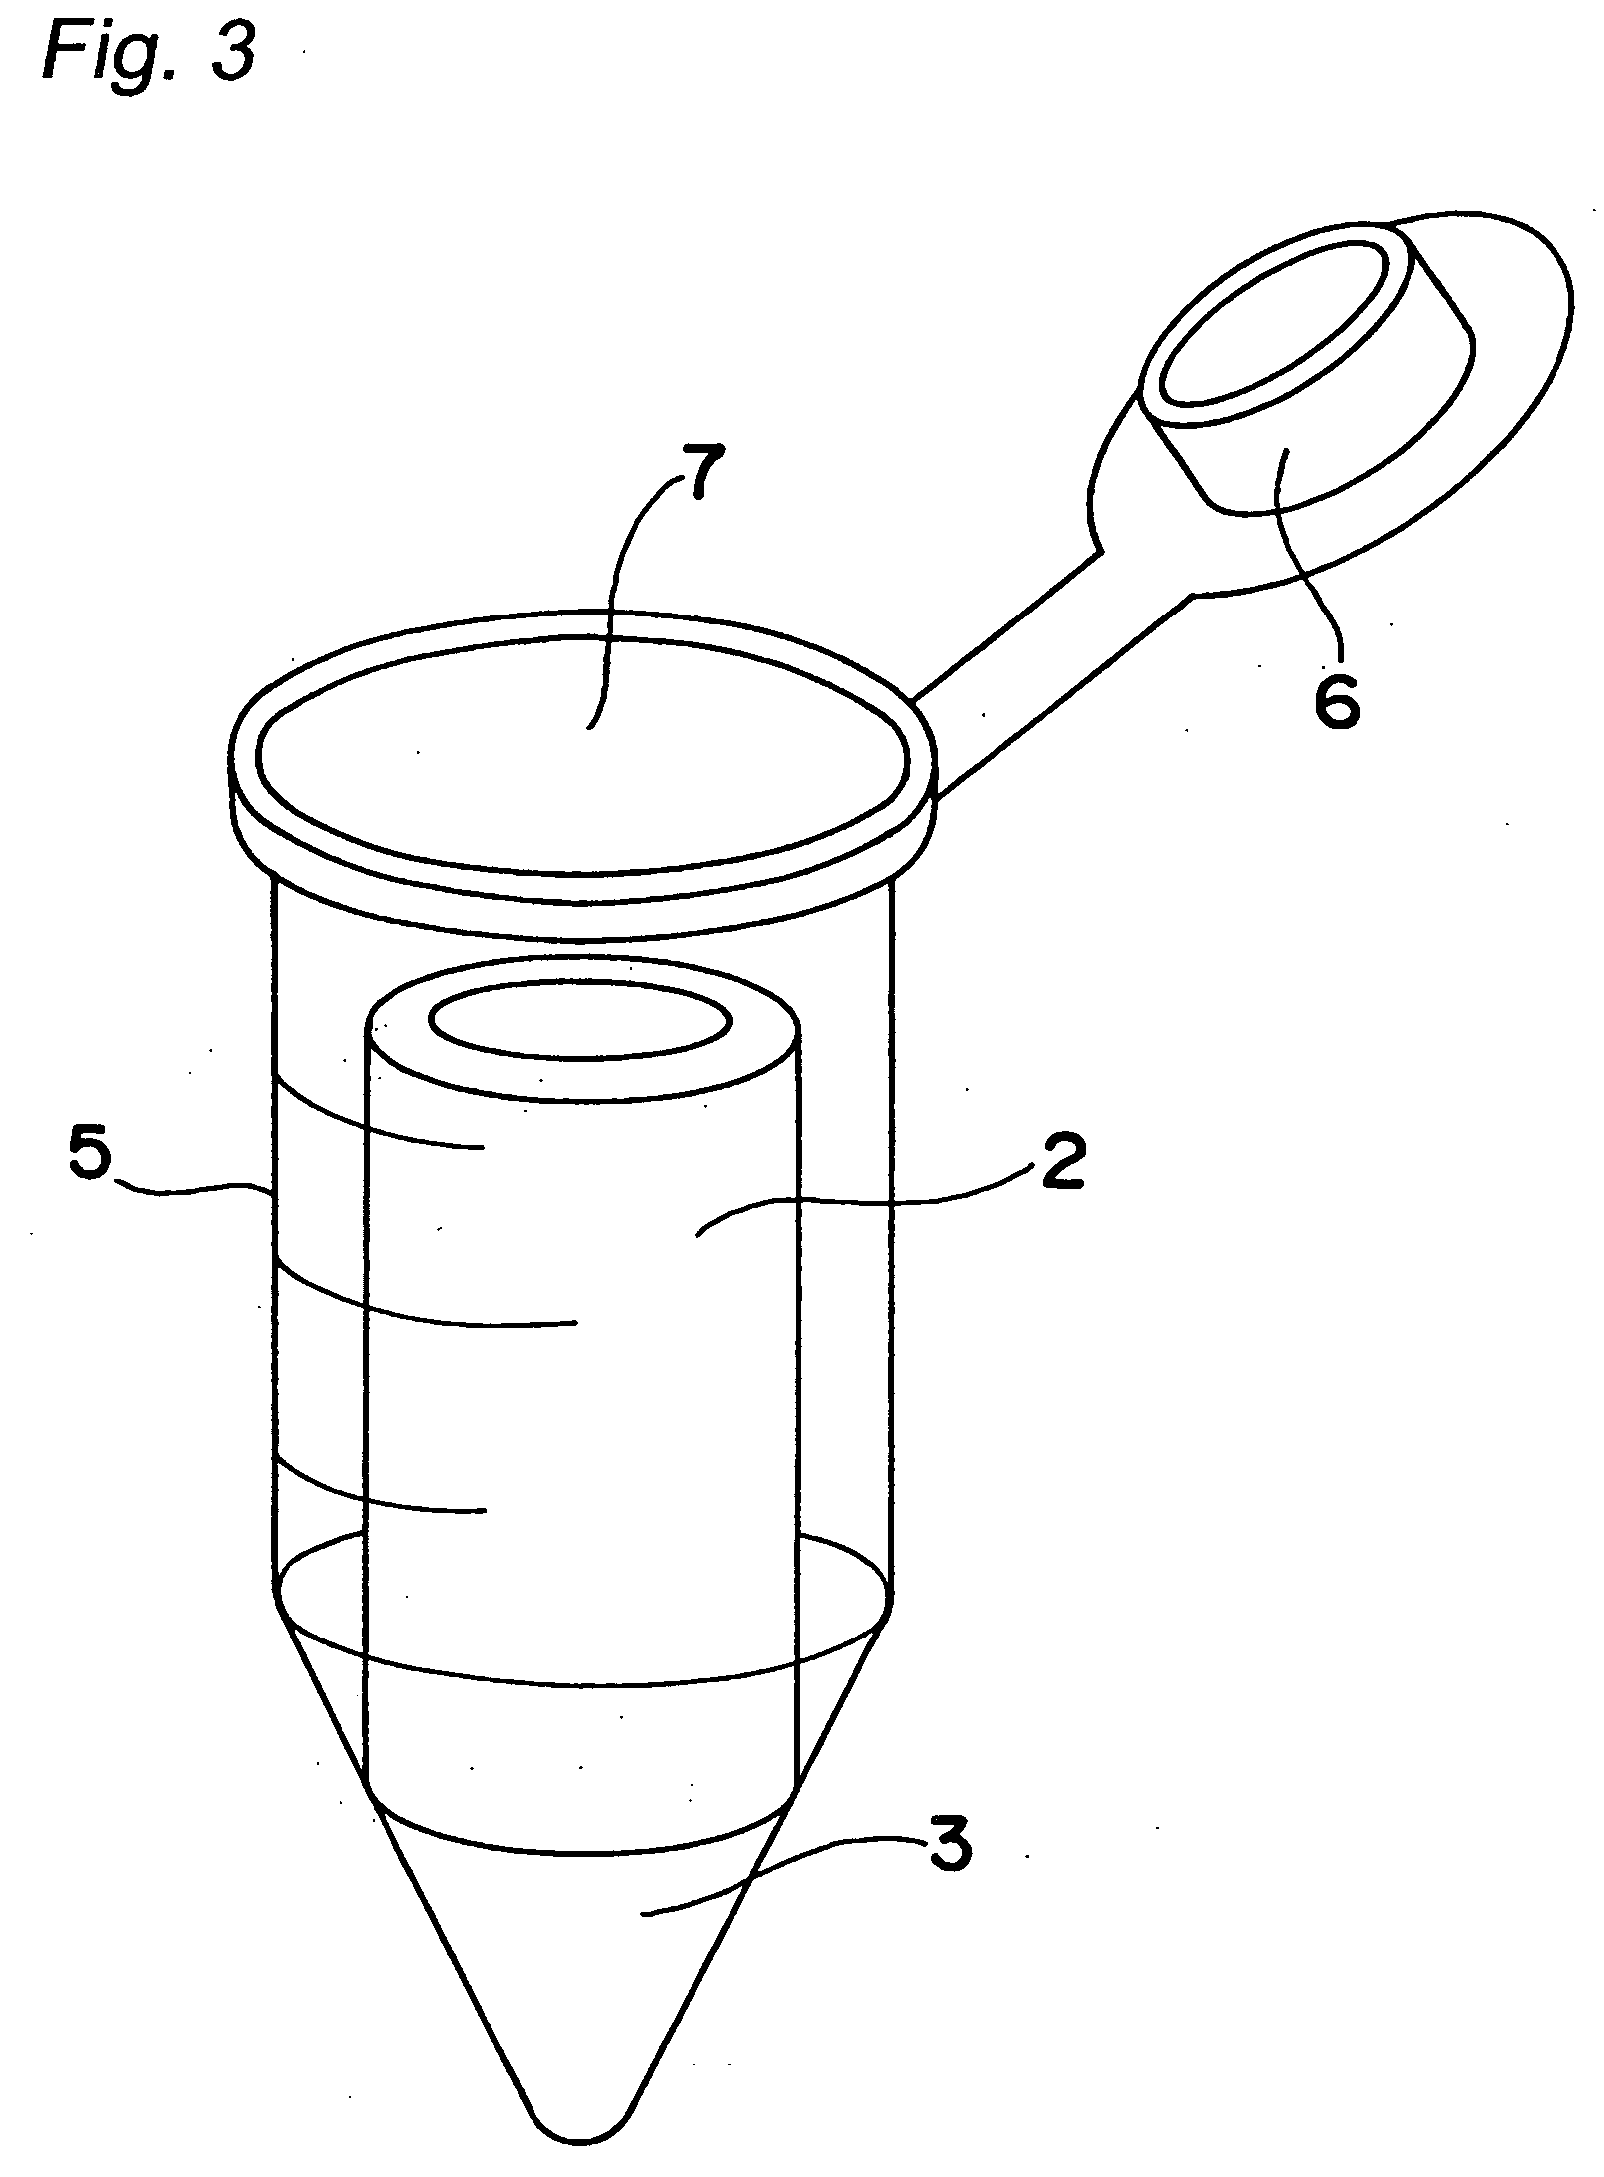 Apparatus for culturing organism and method of culturing organism